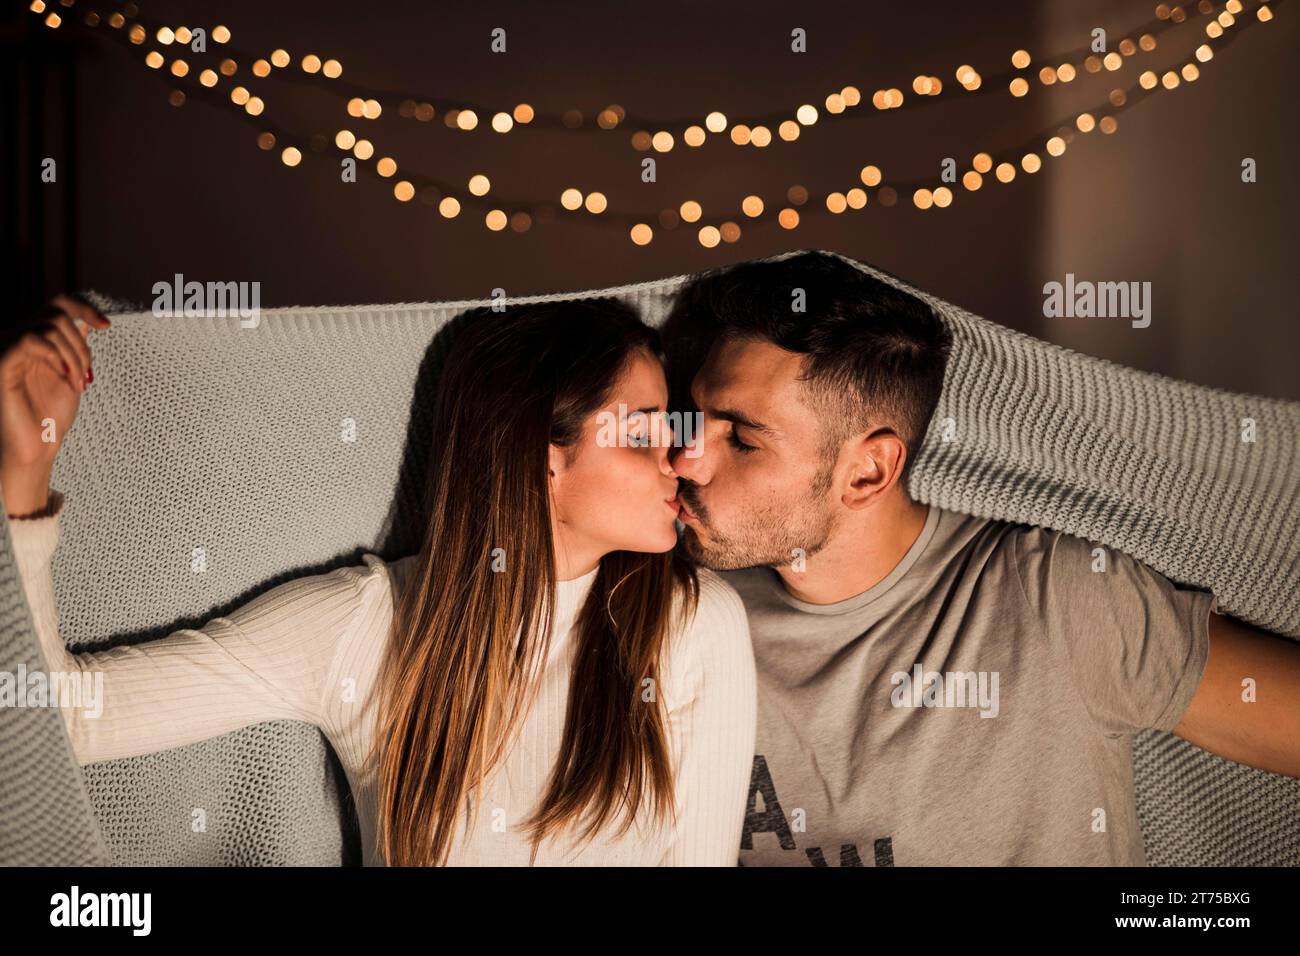 Young woman kissing with man coverlet Stock Photo